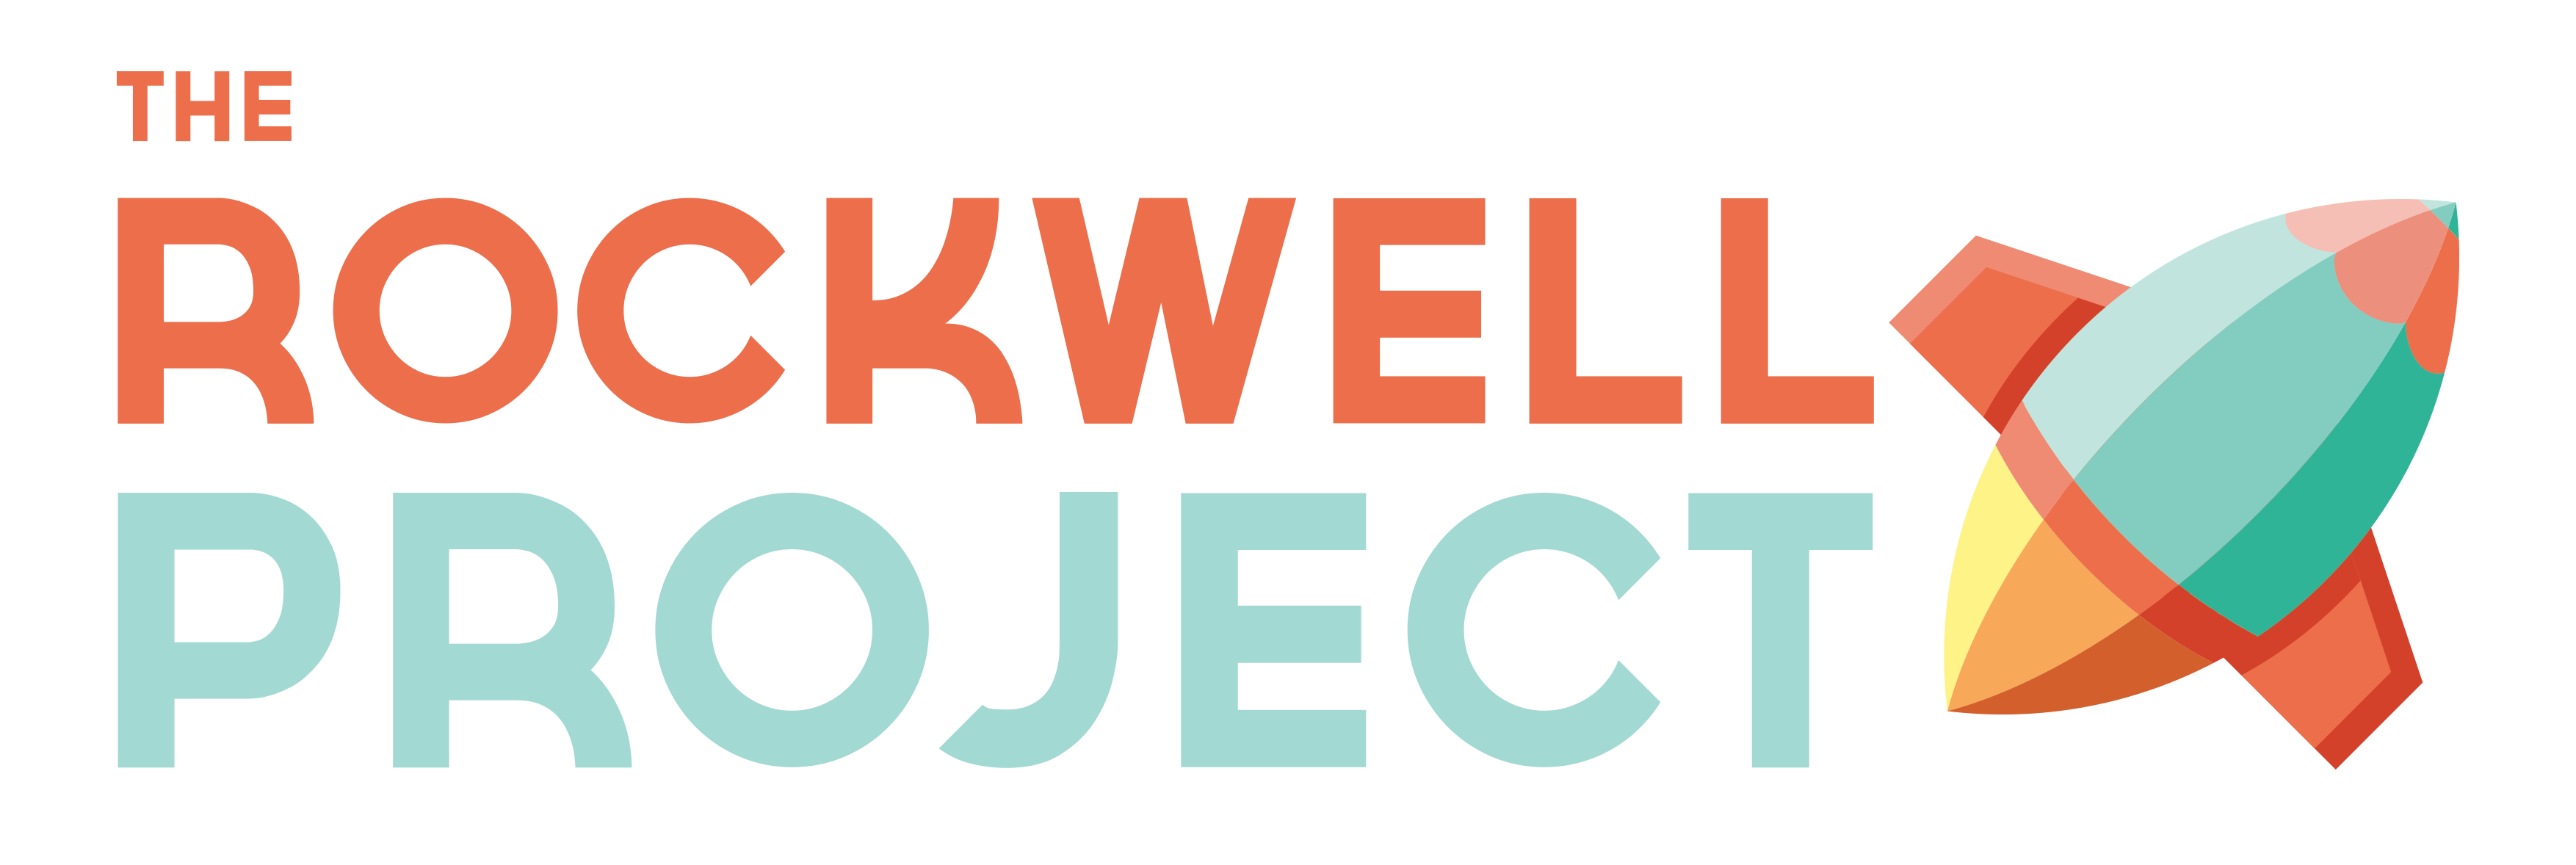 The Rockwell Project